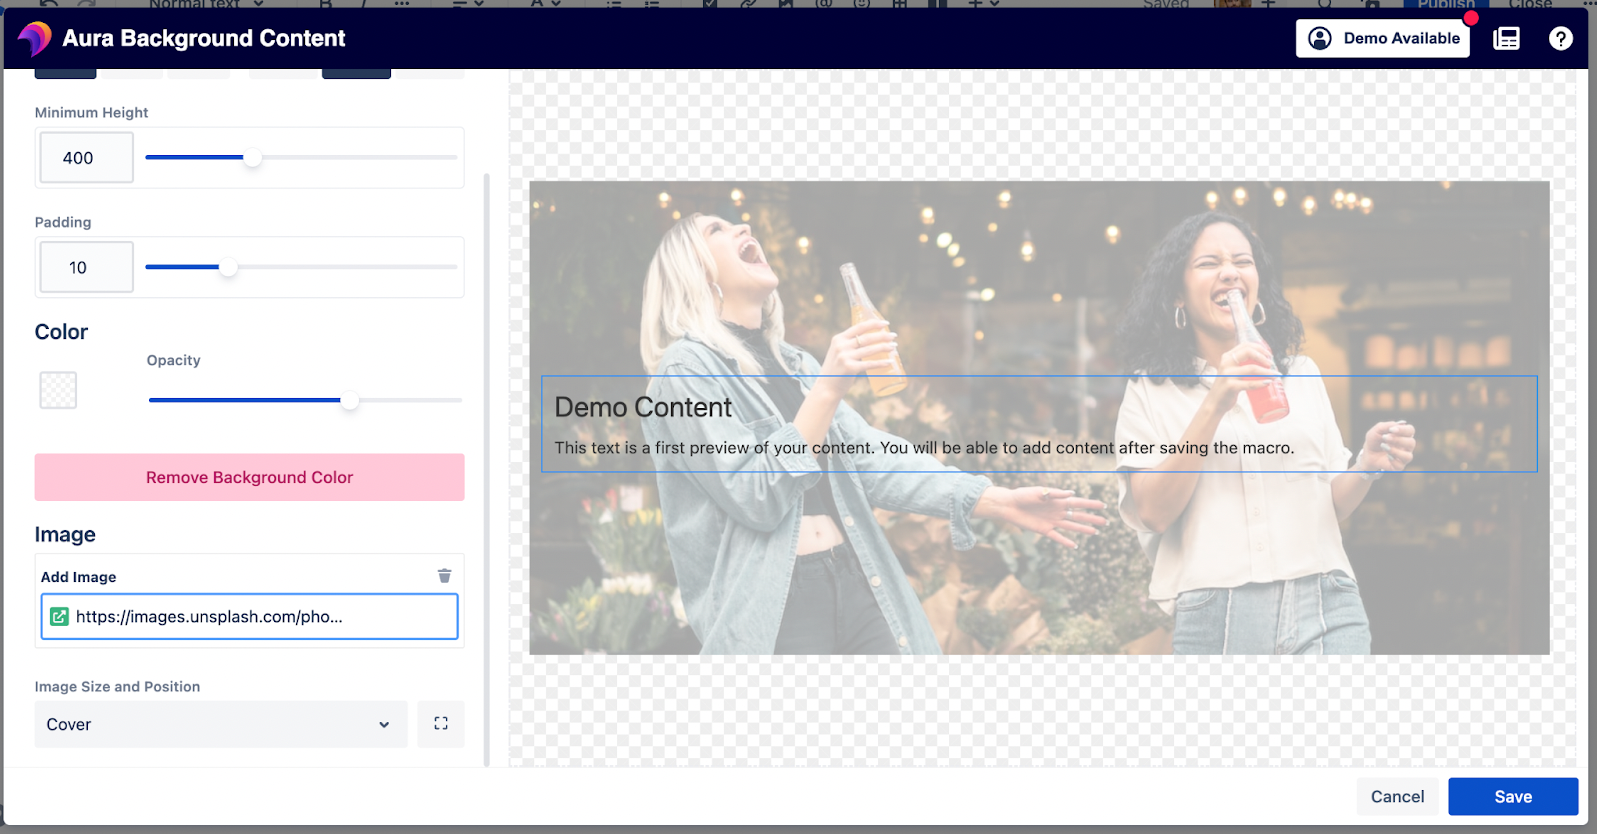 The Best Way to Share Content in Confluence Cloud - Aura Background macro setup